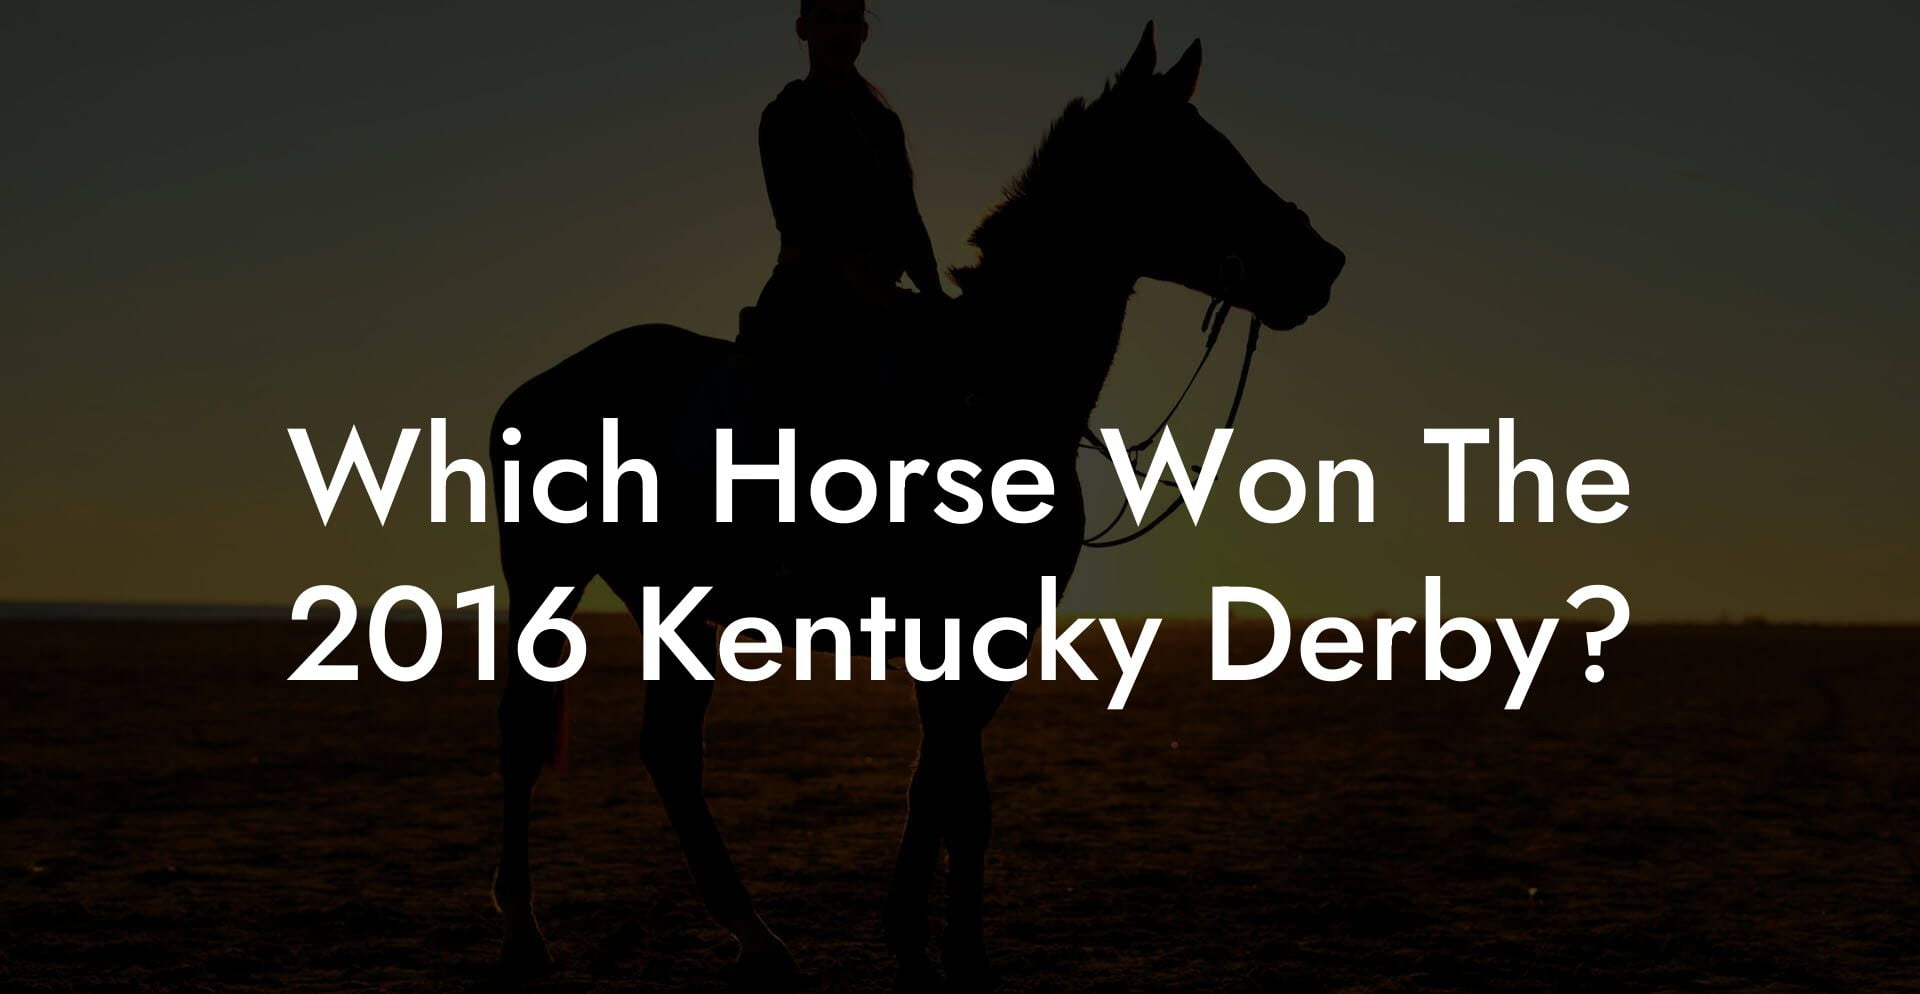 Which Horse Won The 2016 Kentucky Derby?